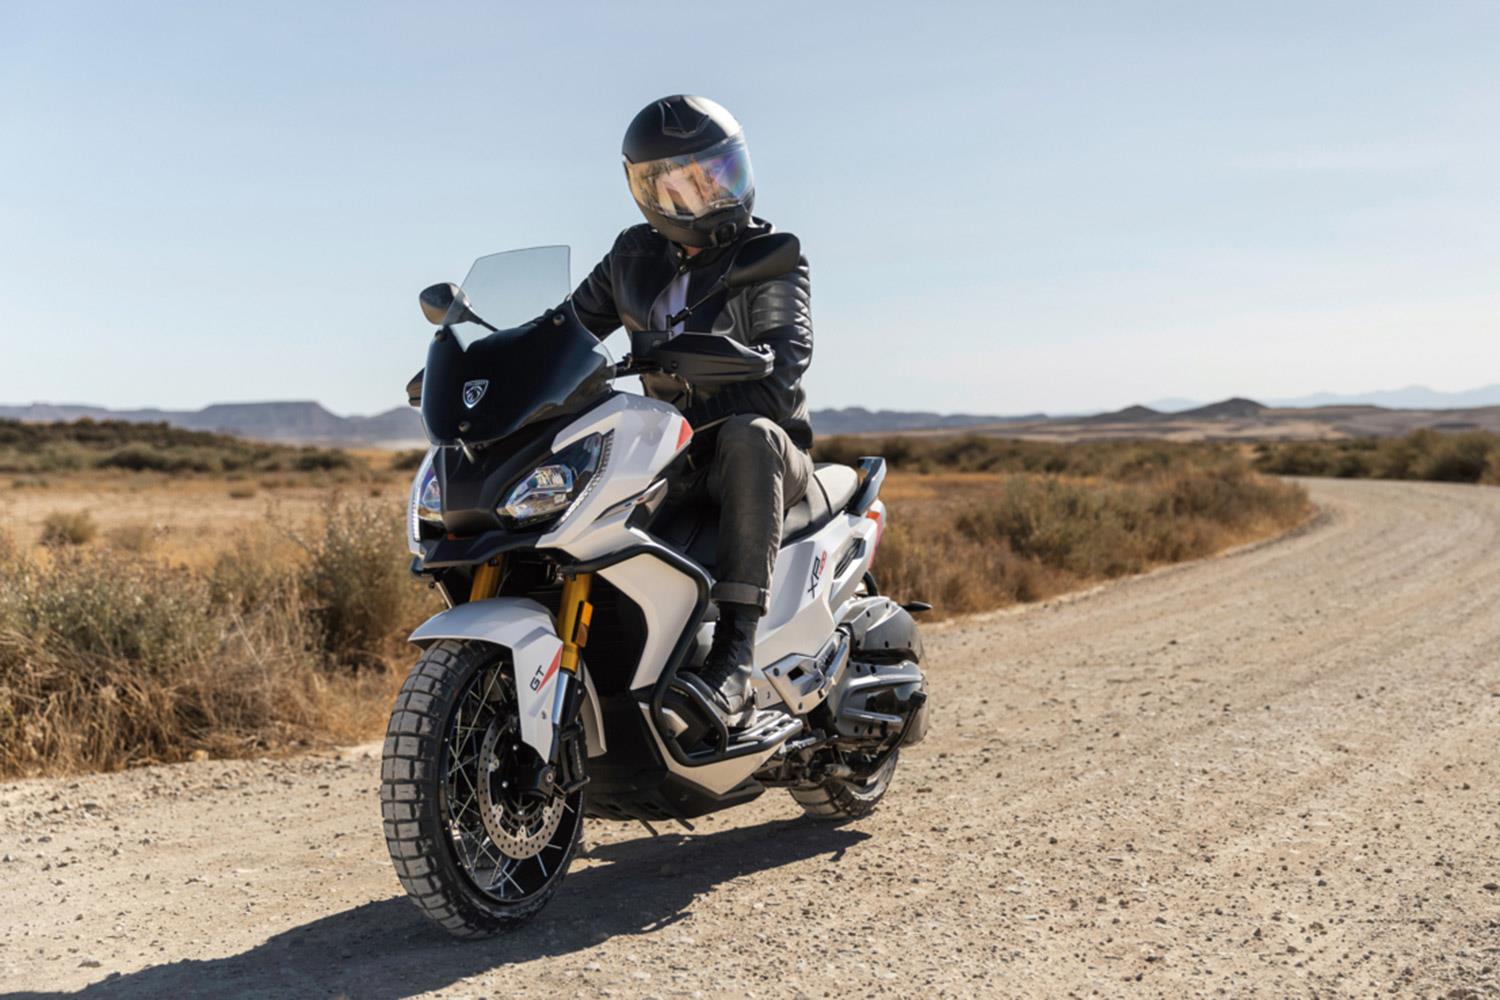 Peugeot's SUV scooter: Rugged new set to challenge for supremacy in the maxi-scoot class | MCN